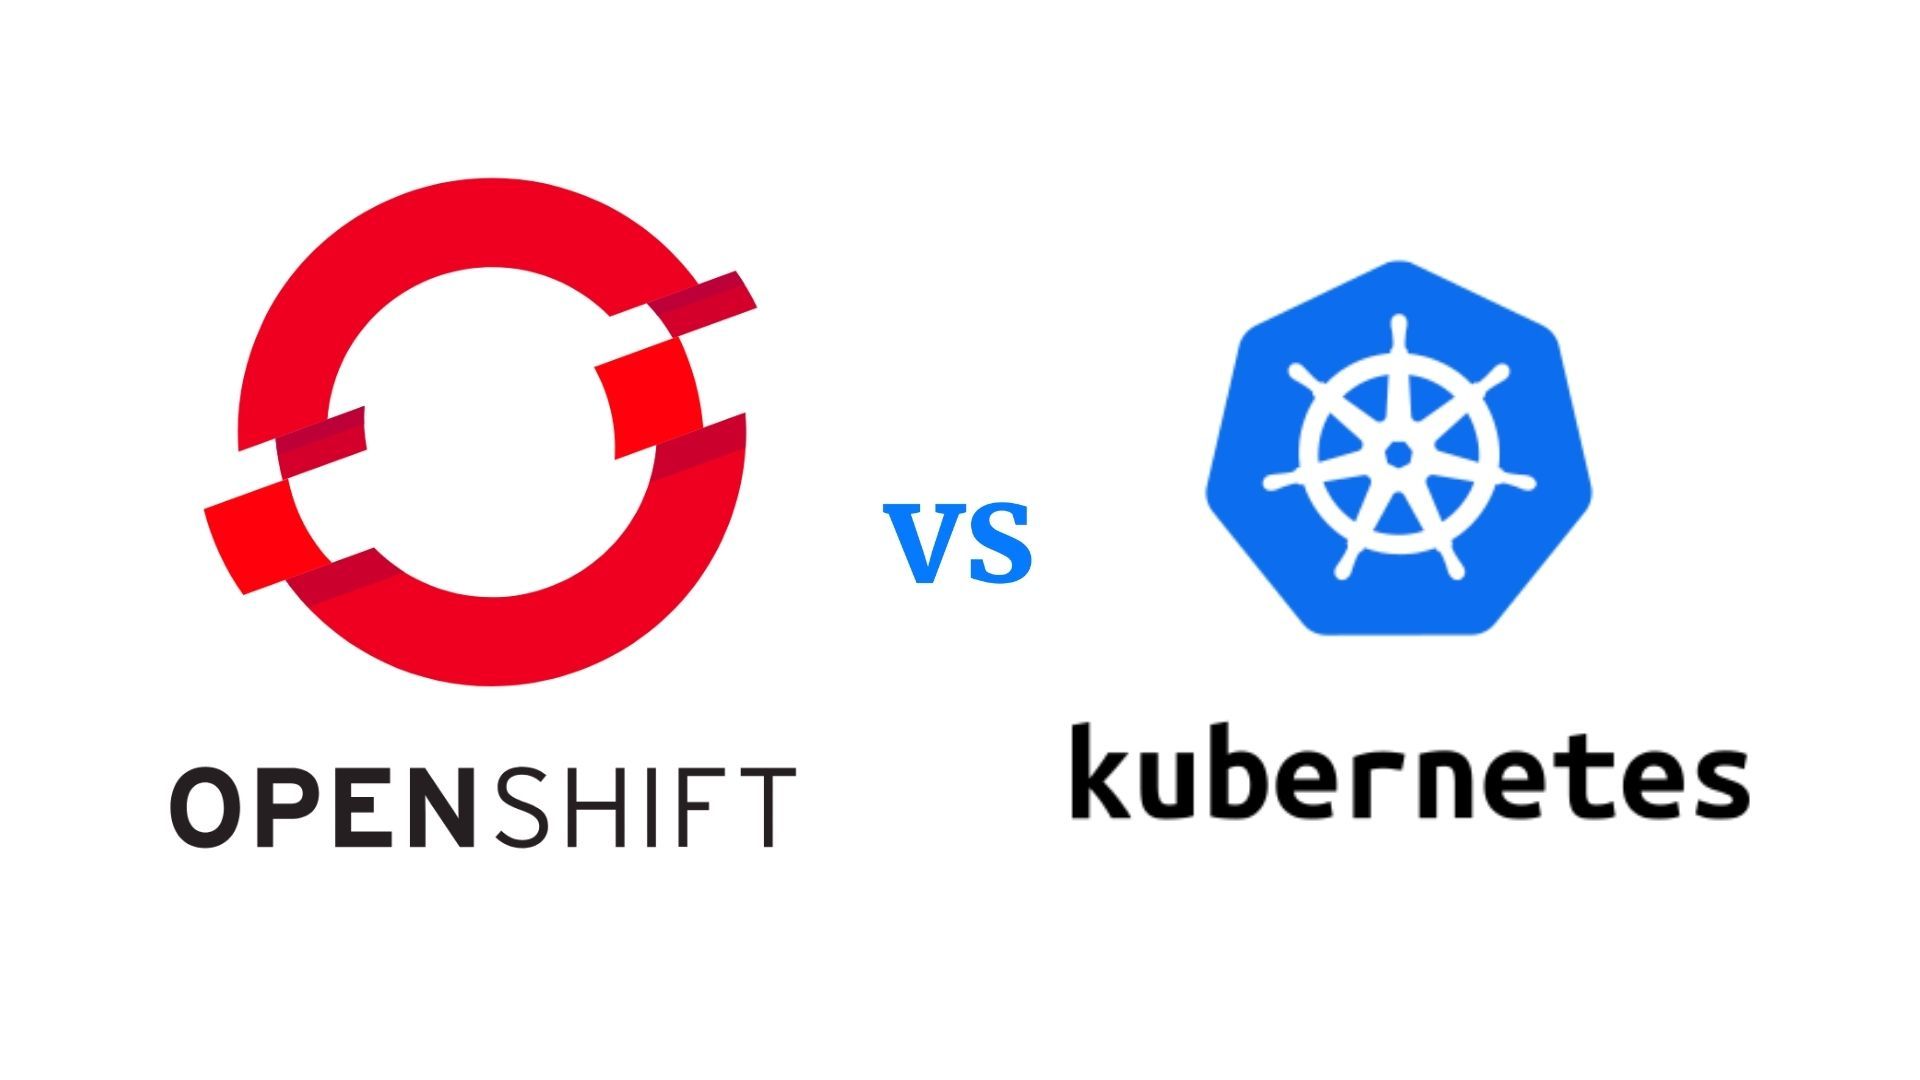 OpenShift vs Kubernetes: what are the differences